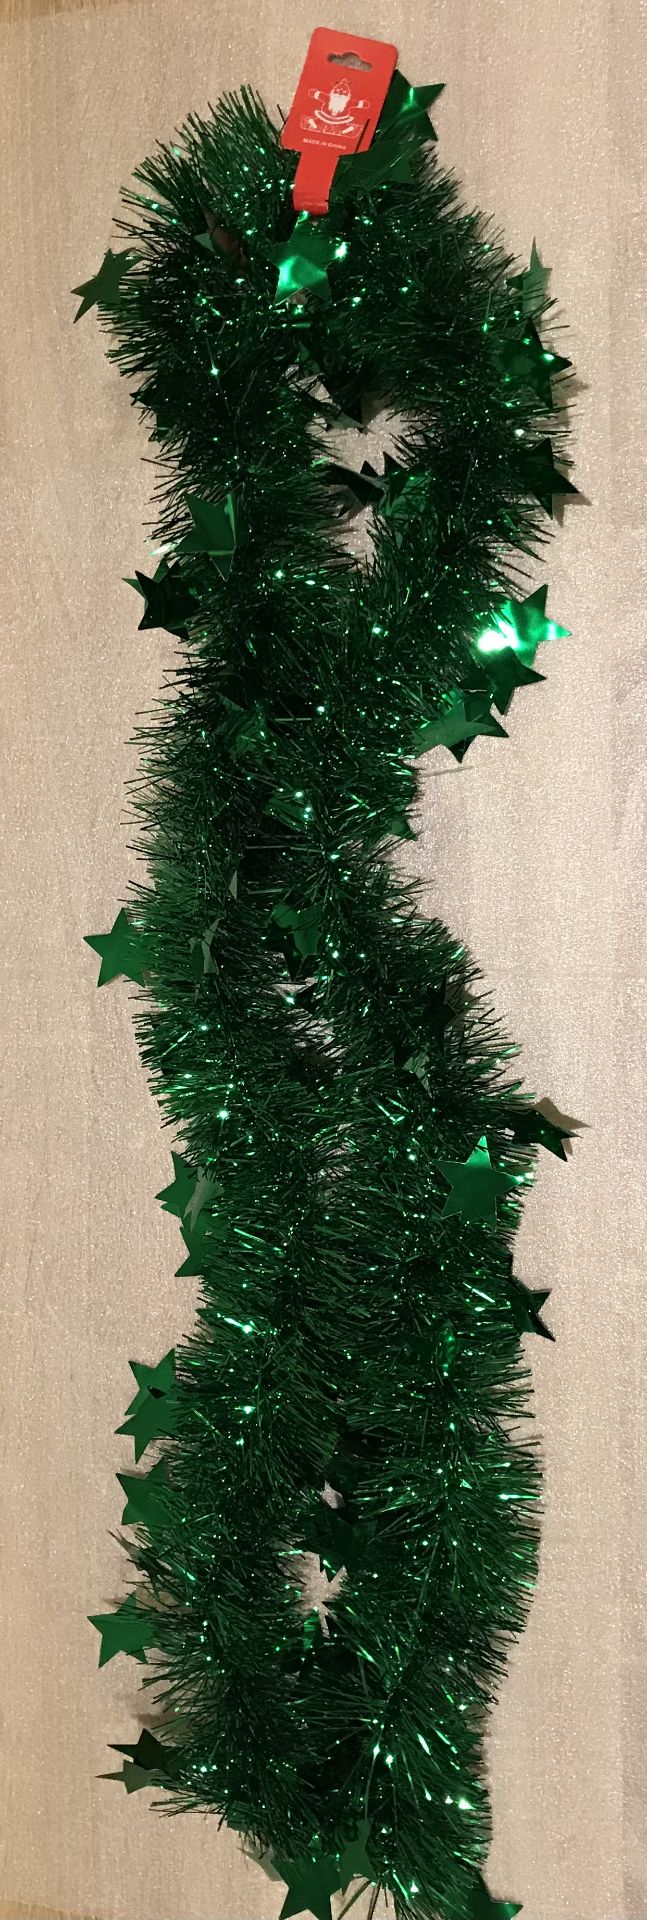 500 X Tinsel With Stars 1.8M Long 5 Colours Gold, Silver, Red, Blue, Green - Image 2 of 6